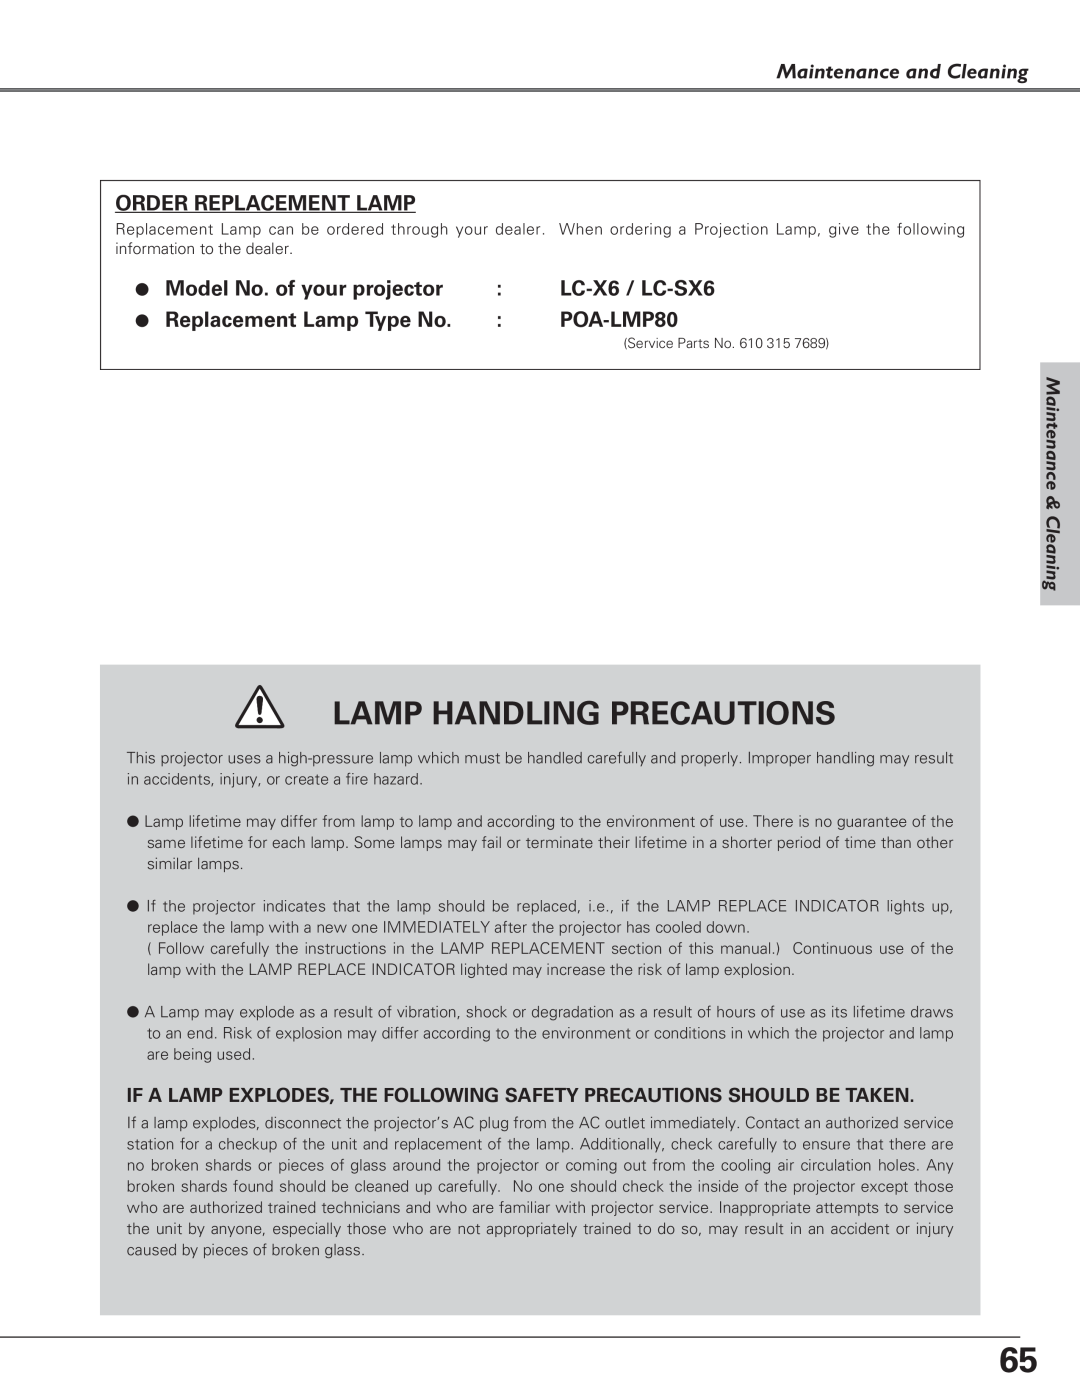 Eiki owner manual Order Replacement Lamp, LC-X6 / LC-SX6, Replacement Lamp Type No, POA-LMP80, Lamp Handling Precautions 